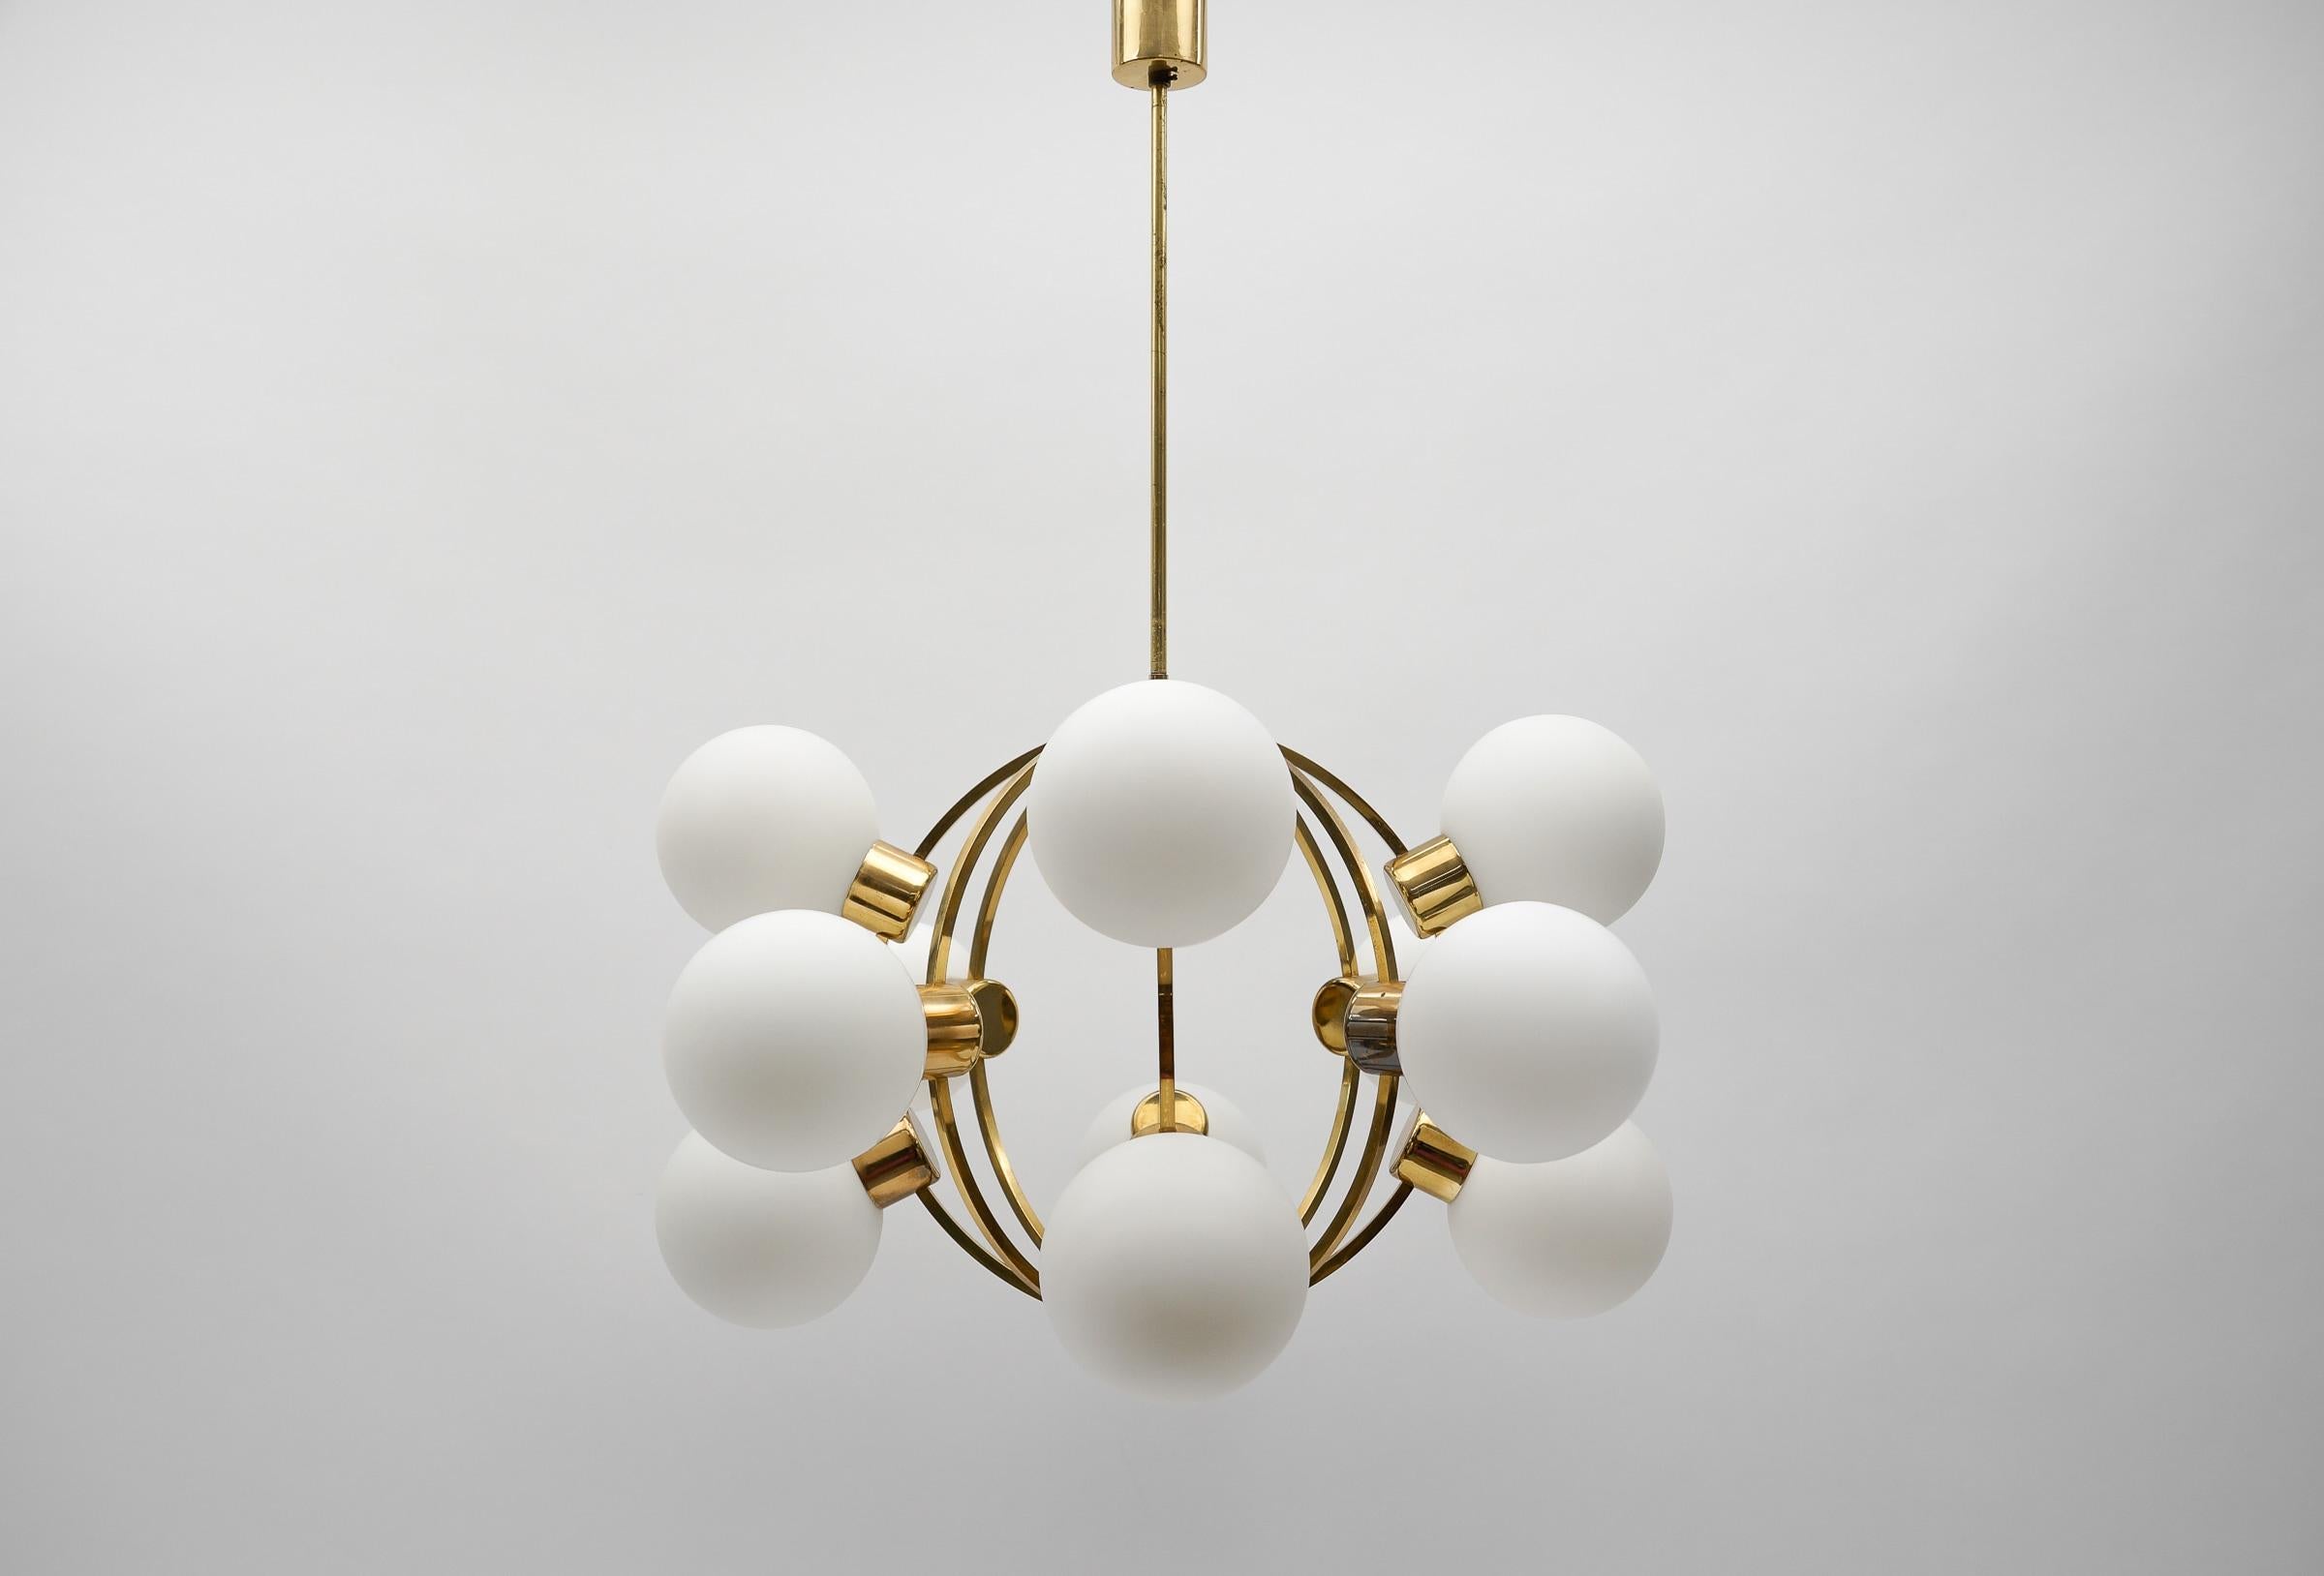 Space Age Large Mid-Century Modern Orbit or Sputnik Lamp with 12 Opaline Glass Balls For Sale